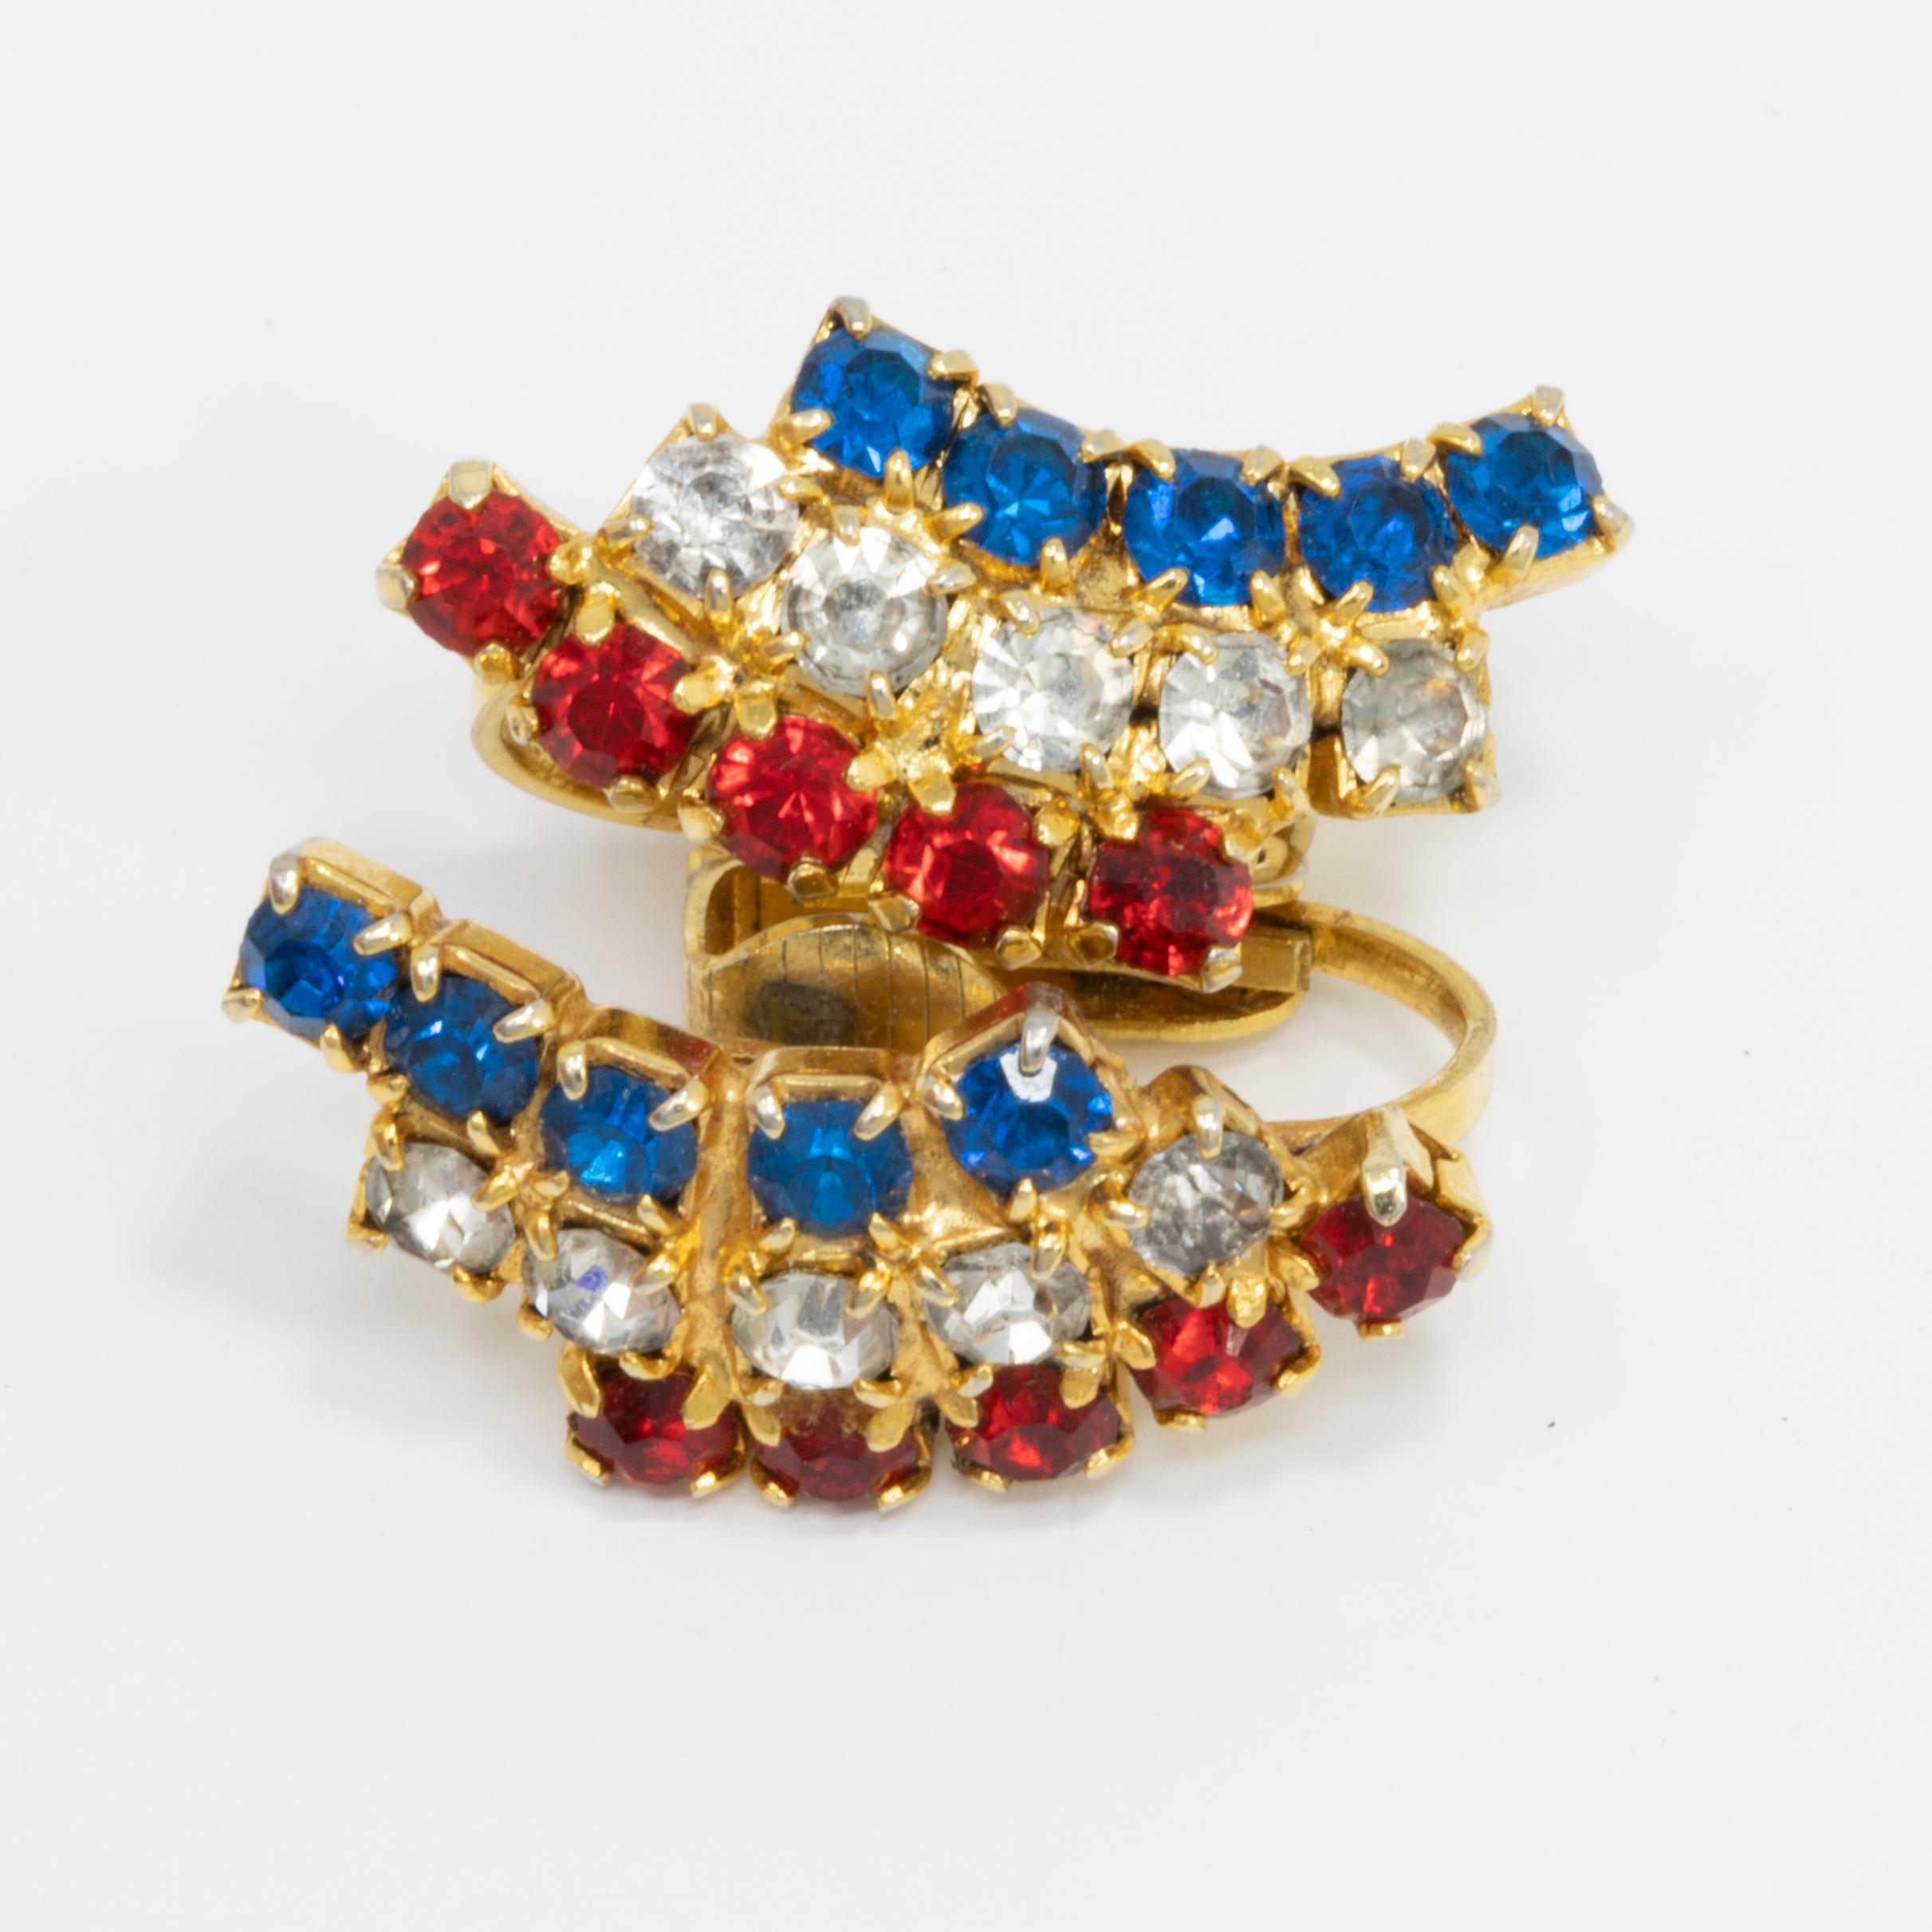 A pair of golden clip on earrings, featuring motifs with red, white, and blue crystals. A classy touch of vintage fashion!

Gold-plated. Circa late 1900s.